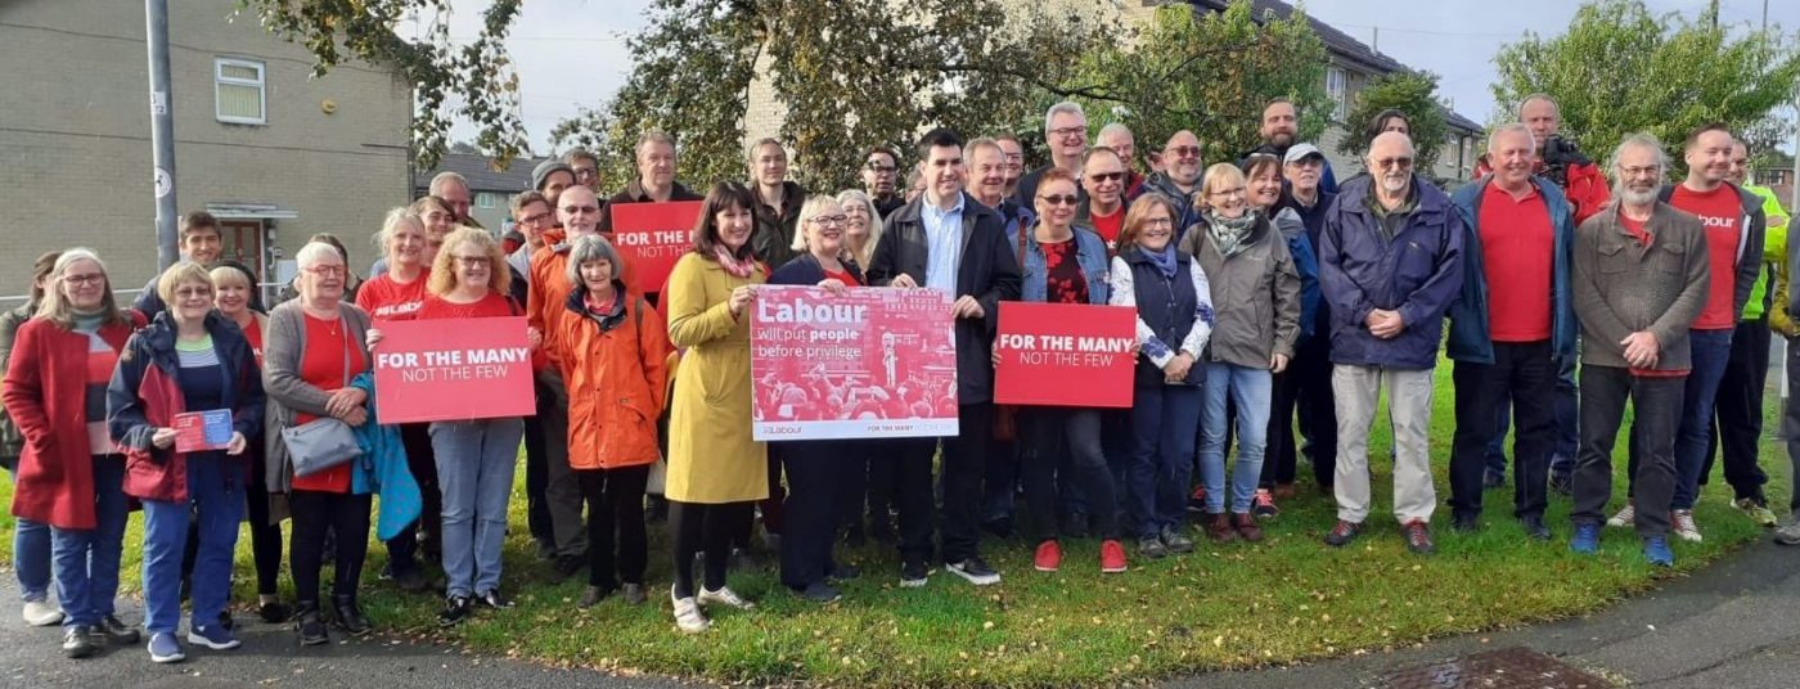 Labour campaigners gathered in a line, behind signs reading "For the many not the few", with Rachel Reeves MP near the middle holding a sign reading "Labour will put people before privilege"